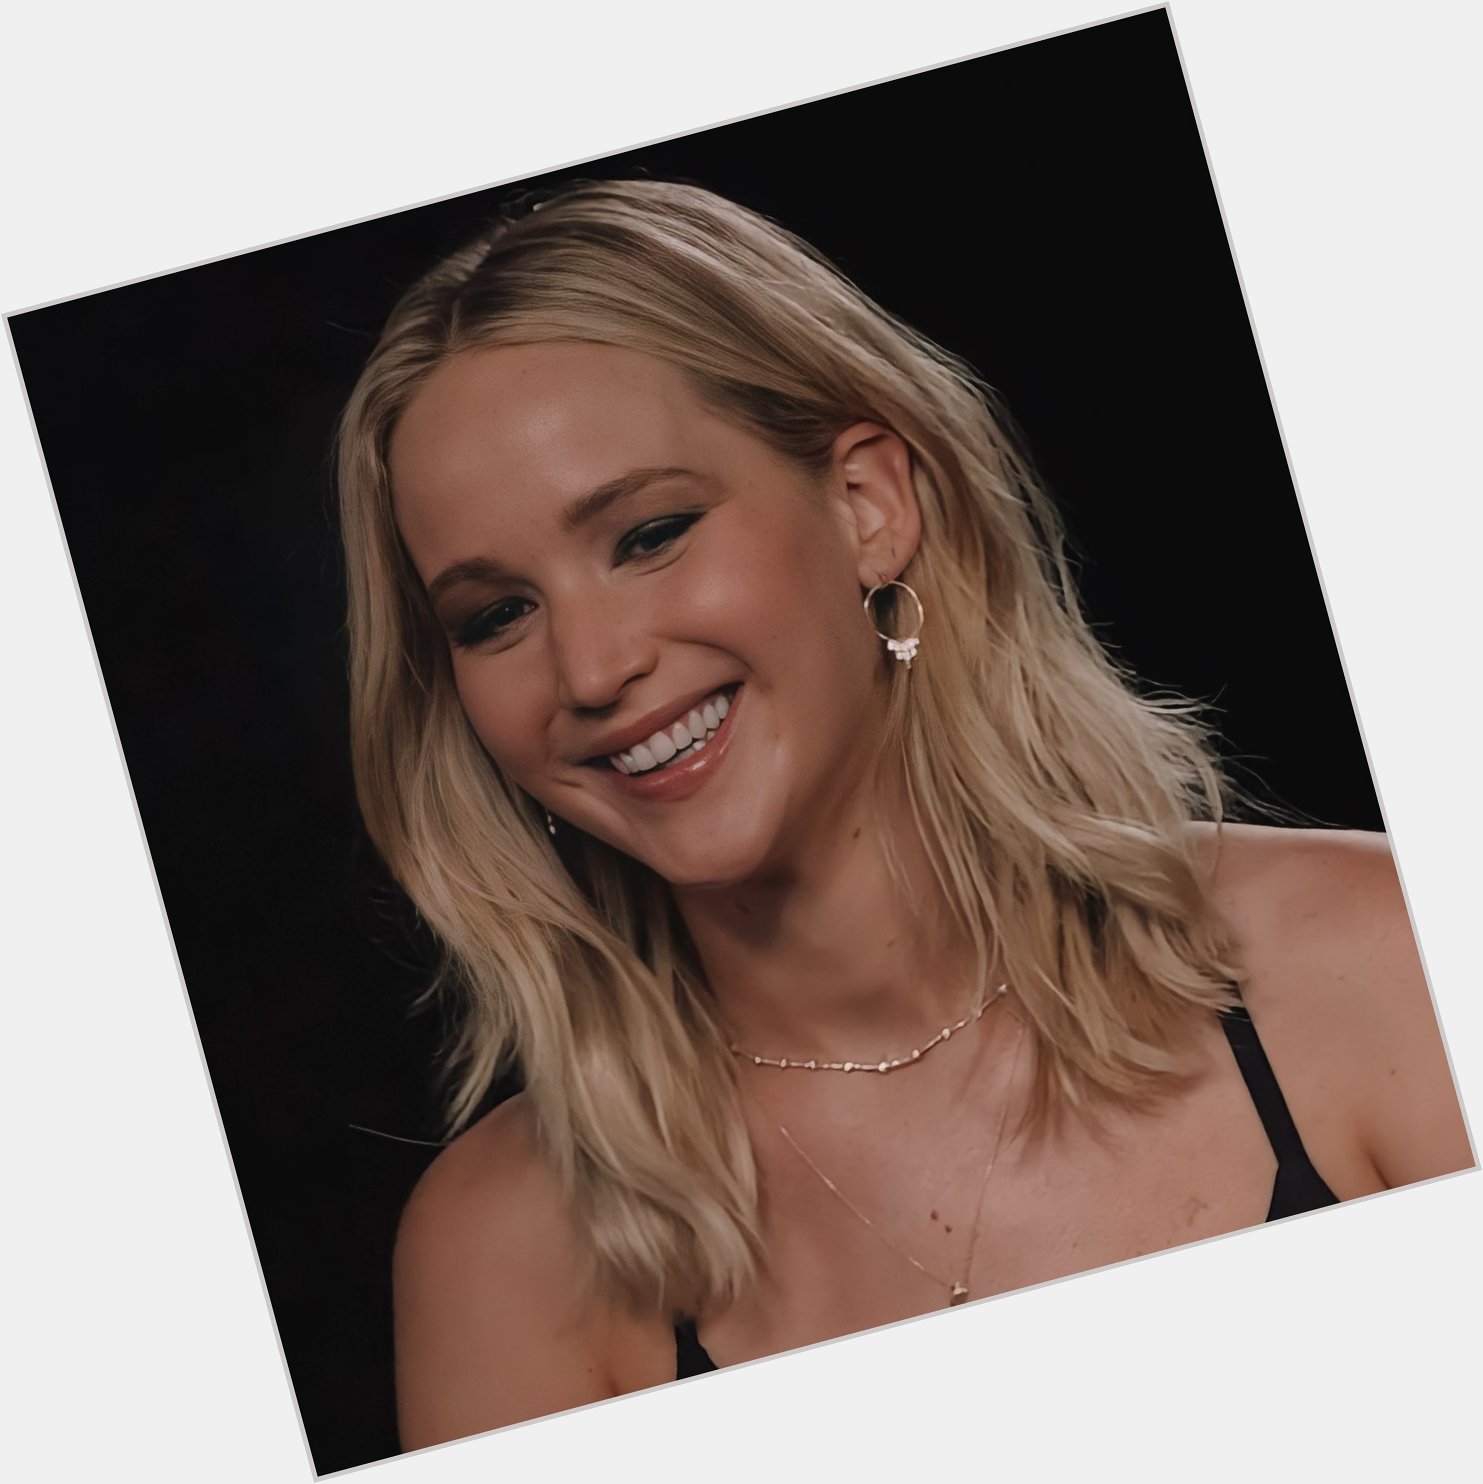 Happy birthday to the most amazing human being on earth, jennifer lawrence. 